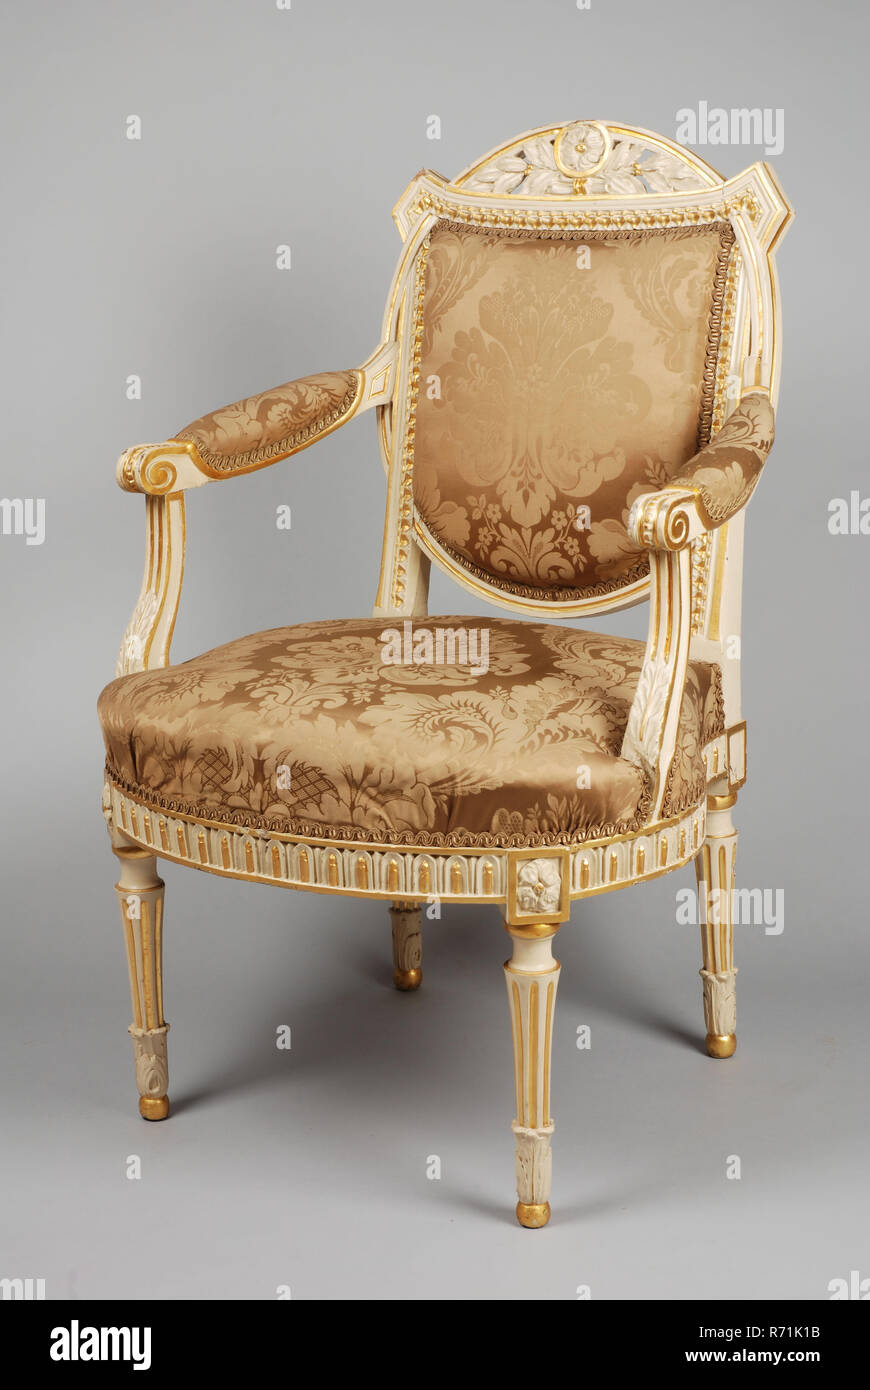 White Painted Partly Gilded Louis Seize Armchair Armchair Chair